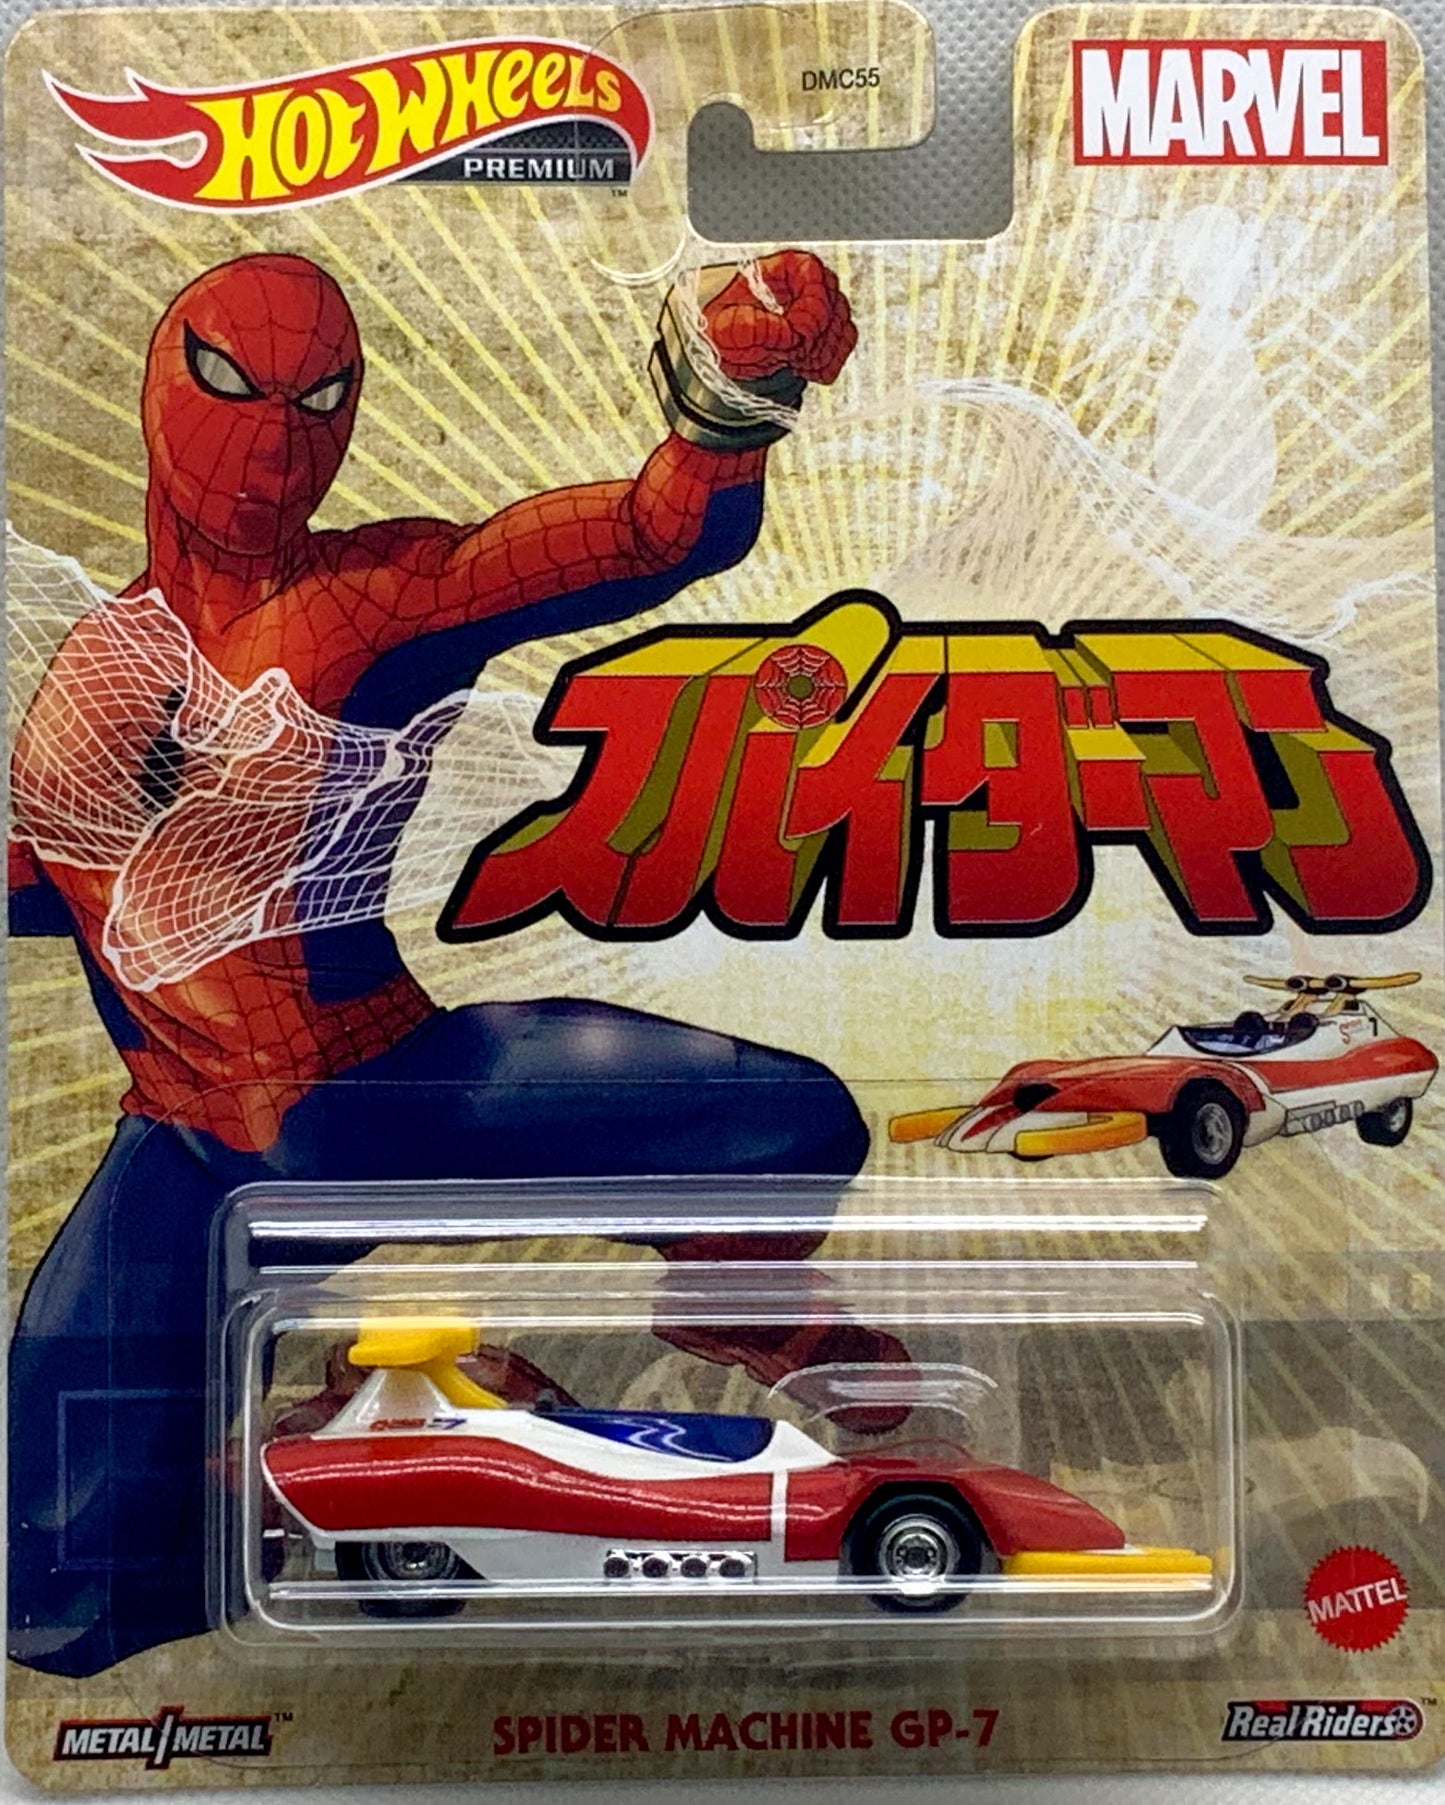 Buy at Tatoy Hot Wheels Replica Entertainment  Spider Machine GP-7 Part of the 5 Car Series Released in 2021 Premium Real Riders Metal Mattel DMC55 Shop Now